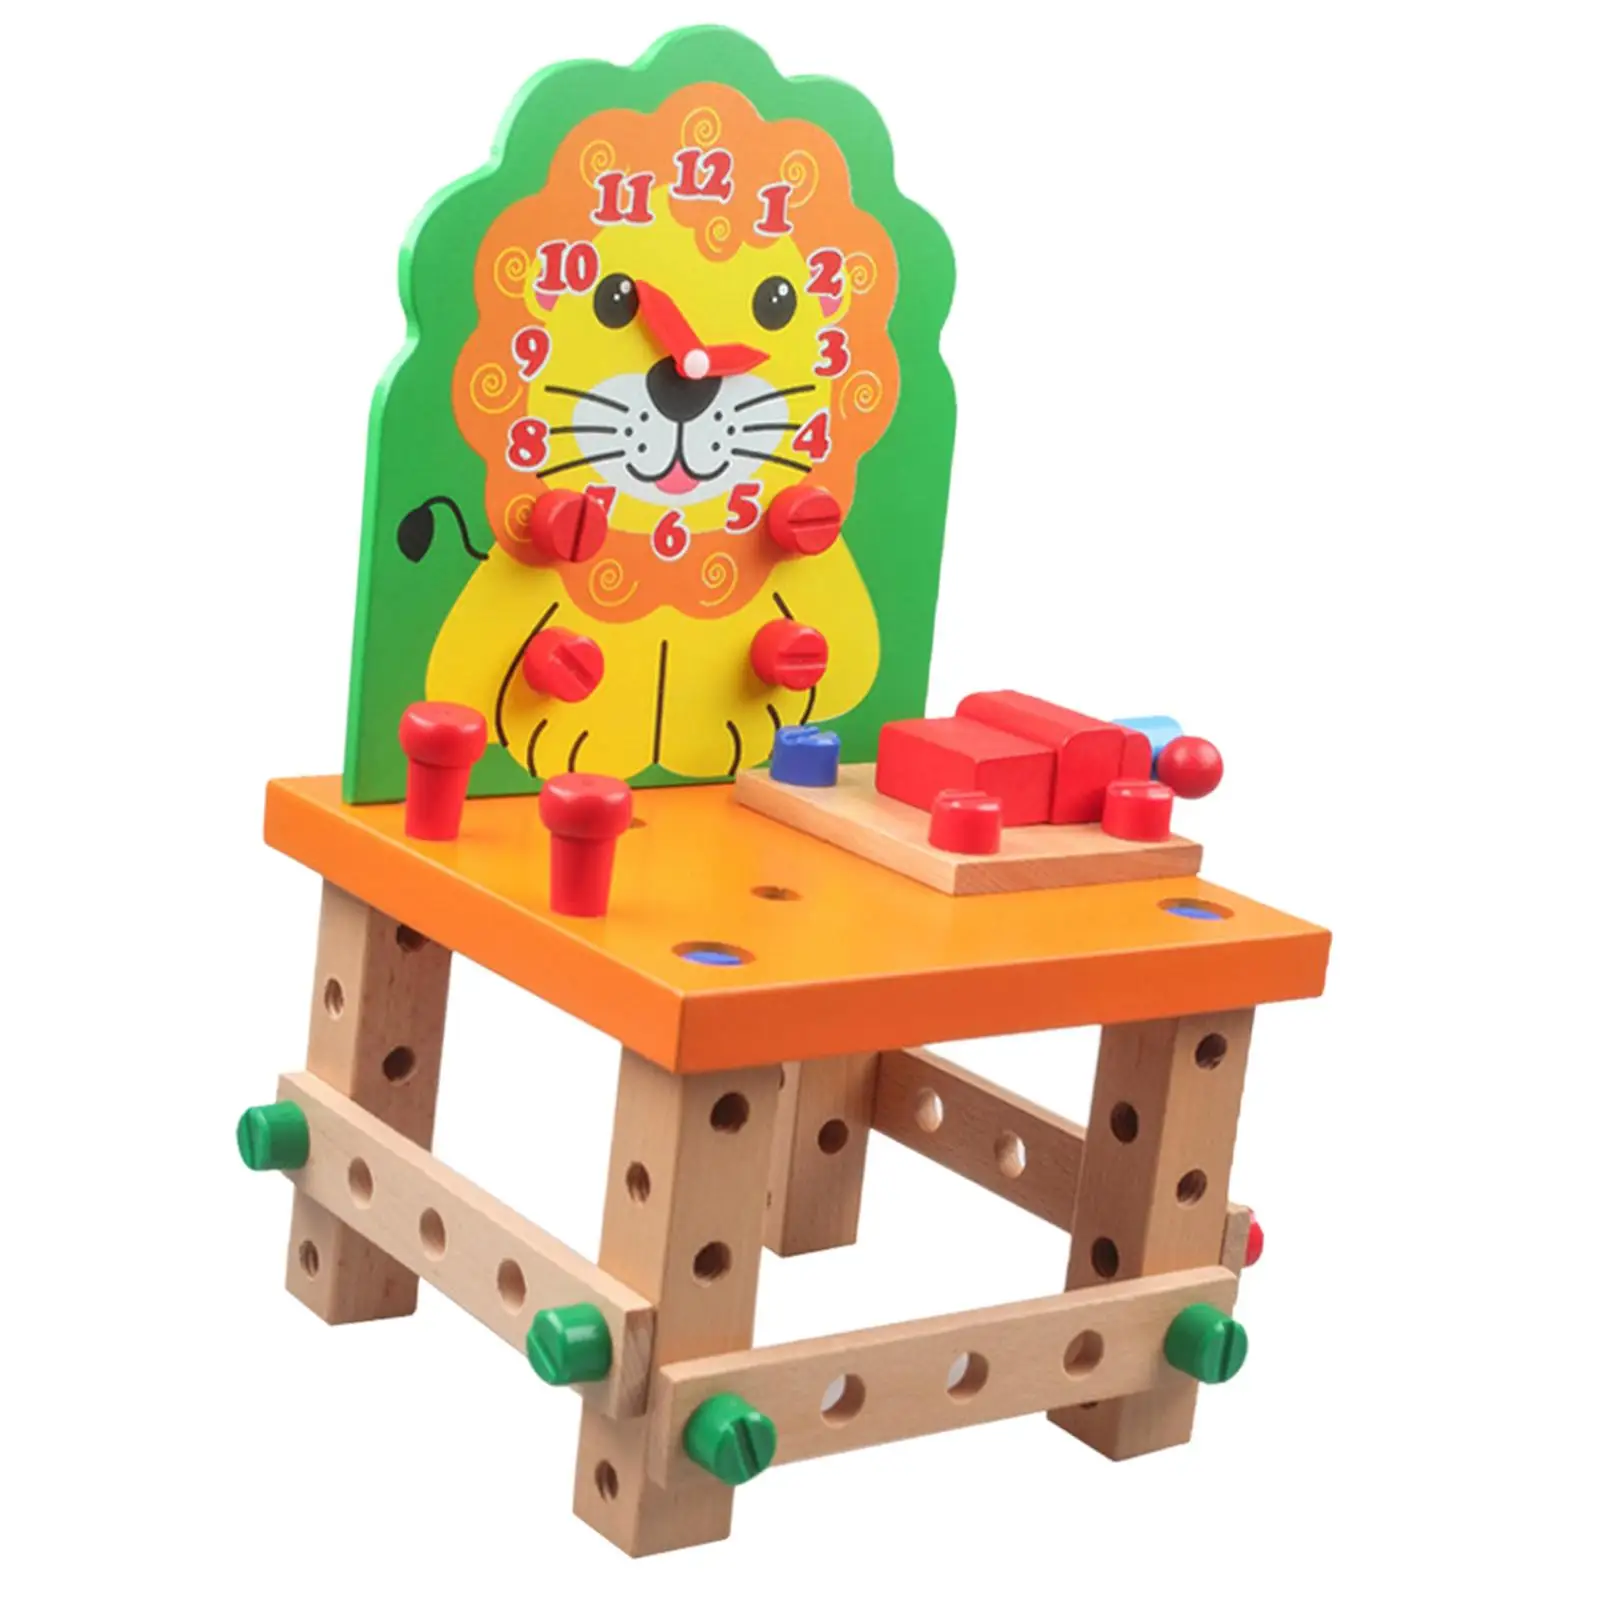 Wooden Chair Models Construction Play Set Kids Wooden Project Woodworking Kit for Children